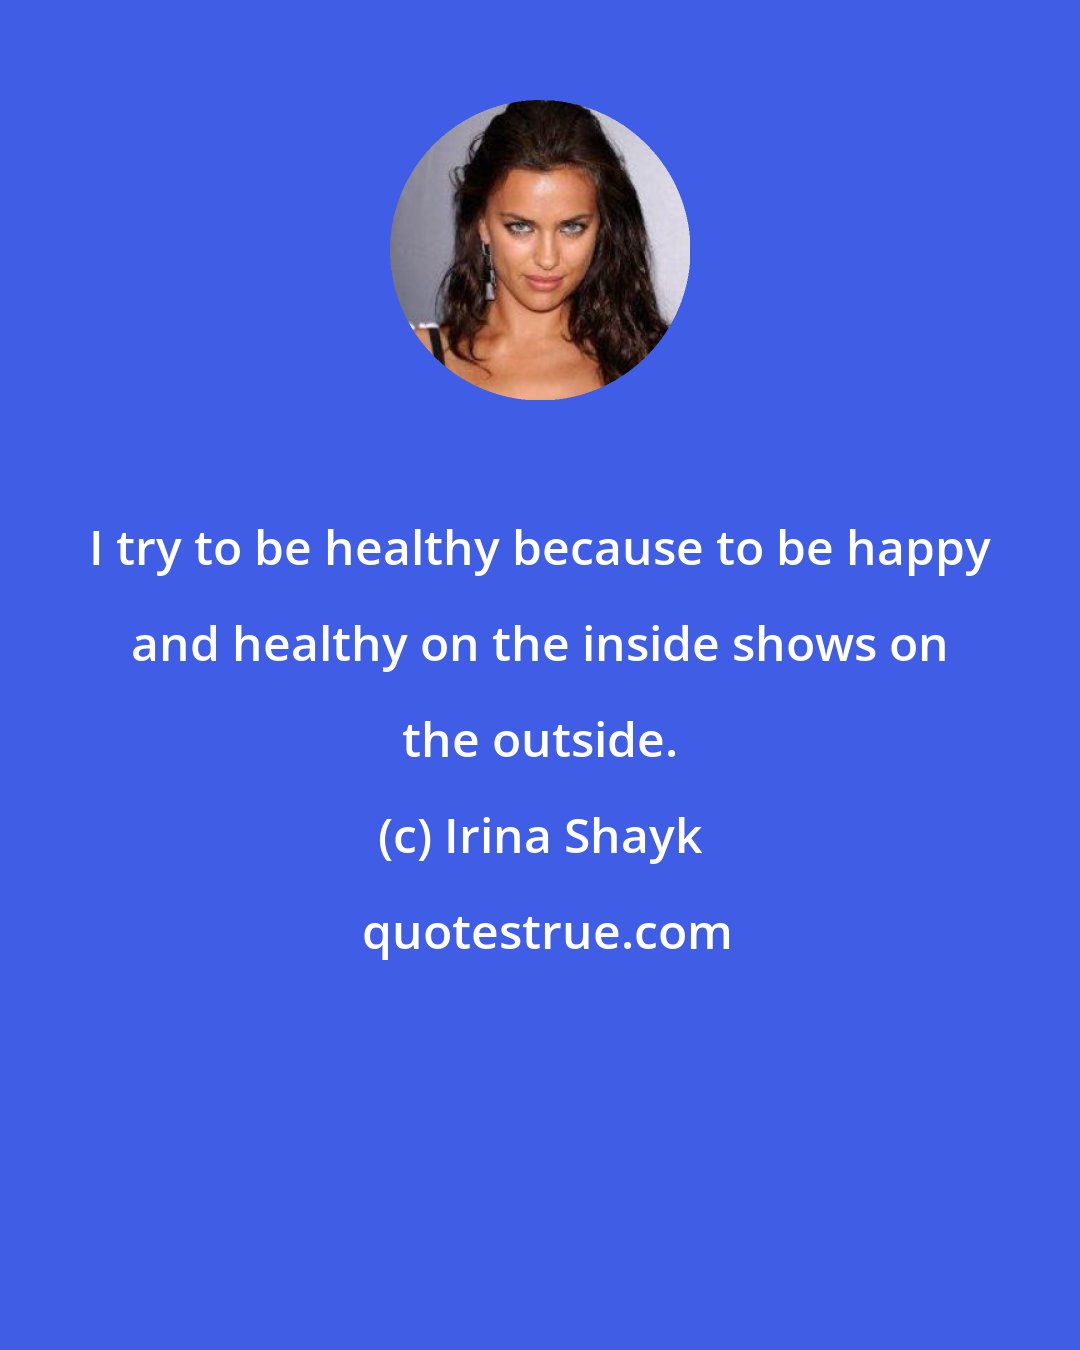 Irina Shayk: I try to be healthy because to be happy and healthy on the inside shows on the outside.